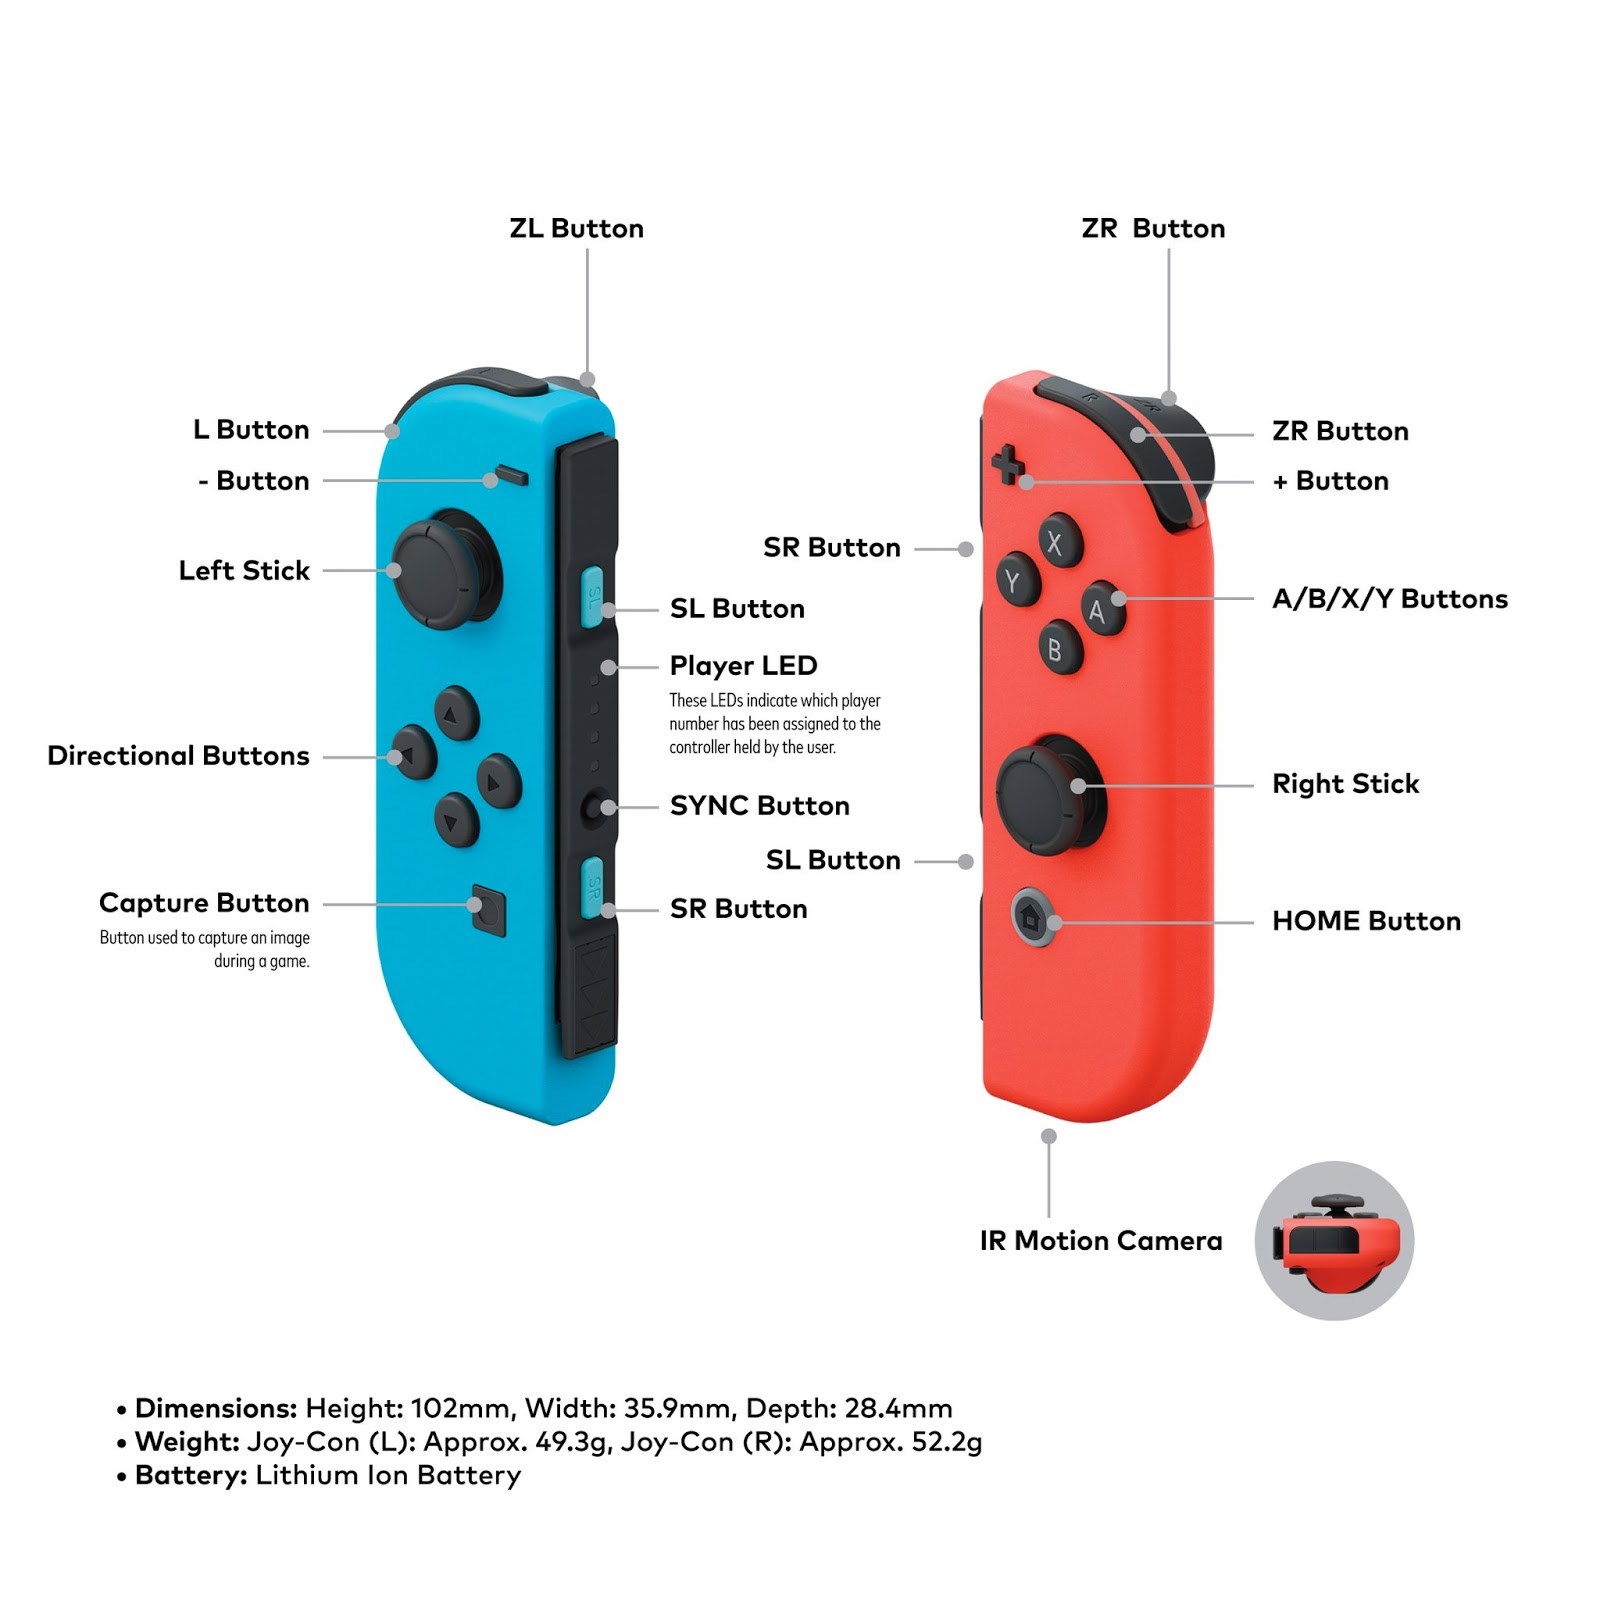 Button layout for the Nintendo Switch Joy-Cons